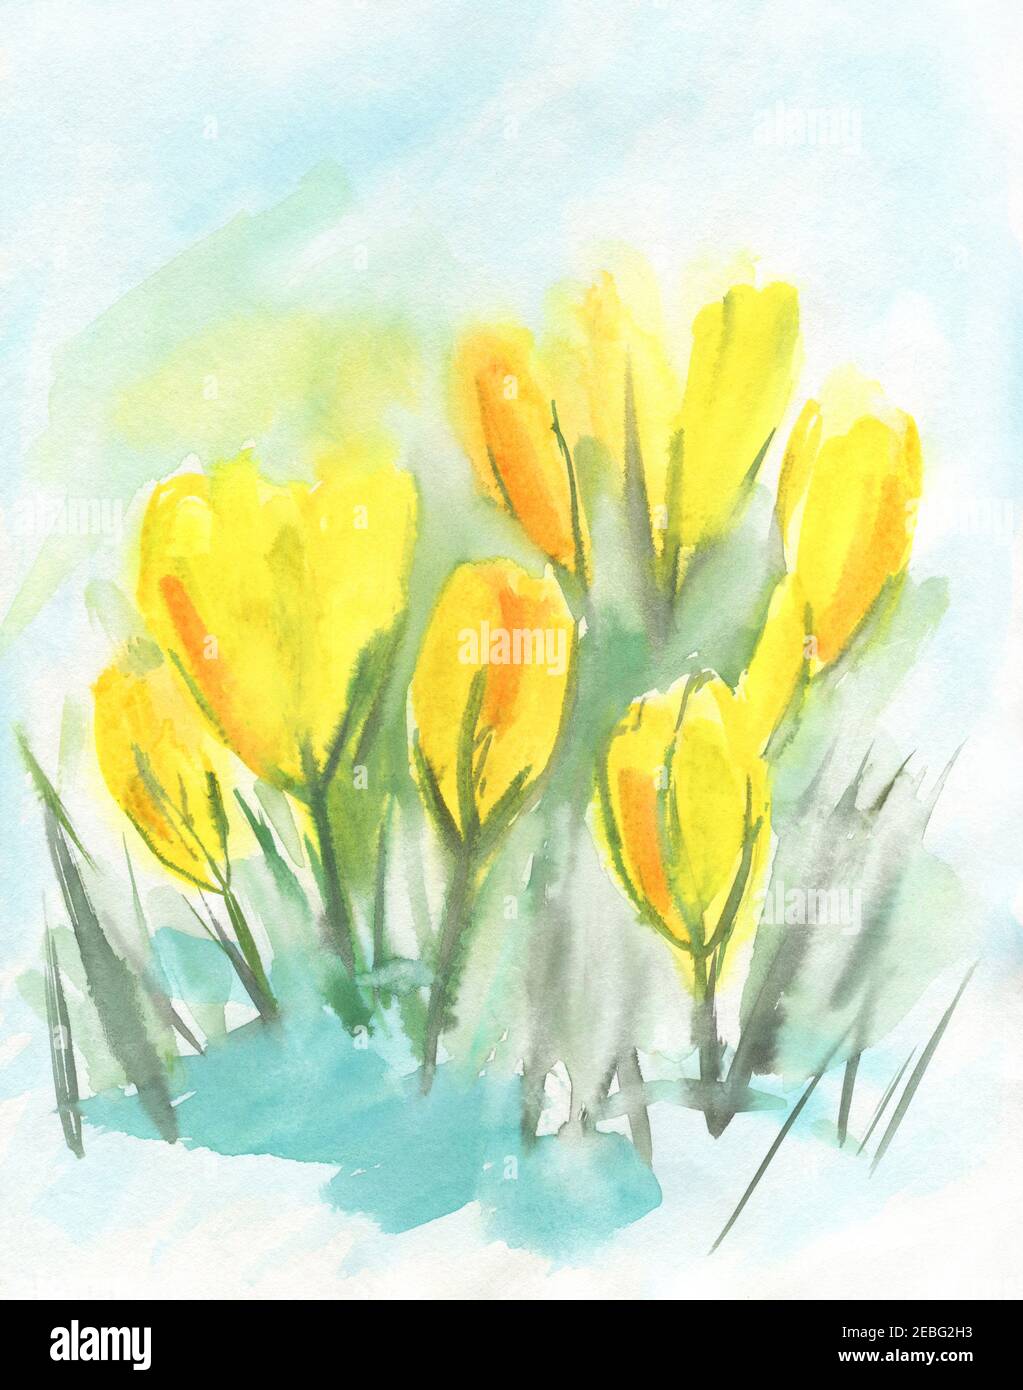 Watercolor yellow crocuses. Saffron flowers. Spring flowers primroses. Drawn by hand. Stock Photo